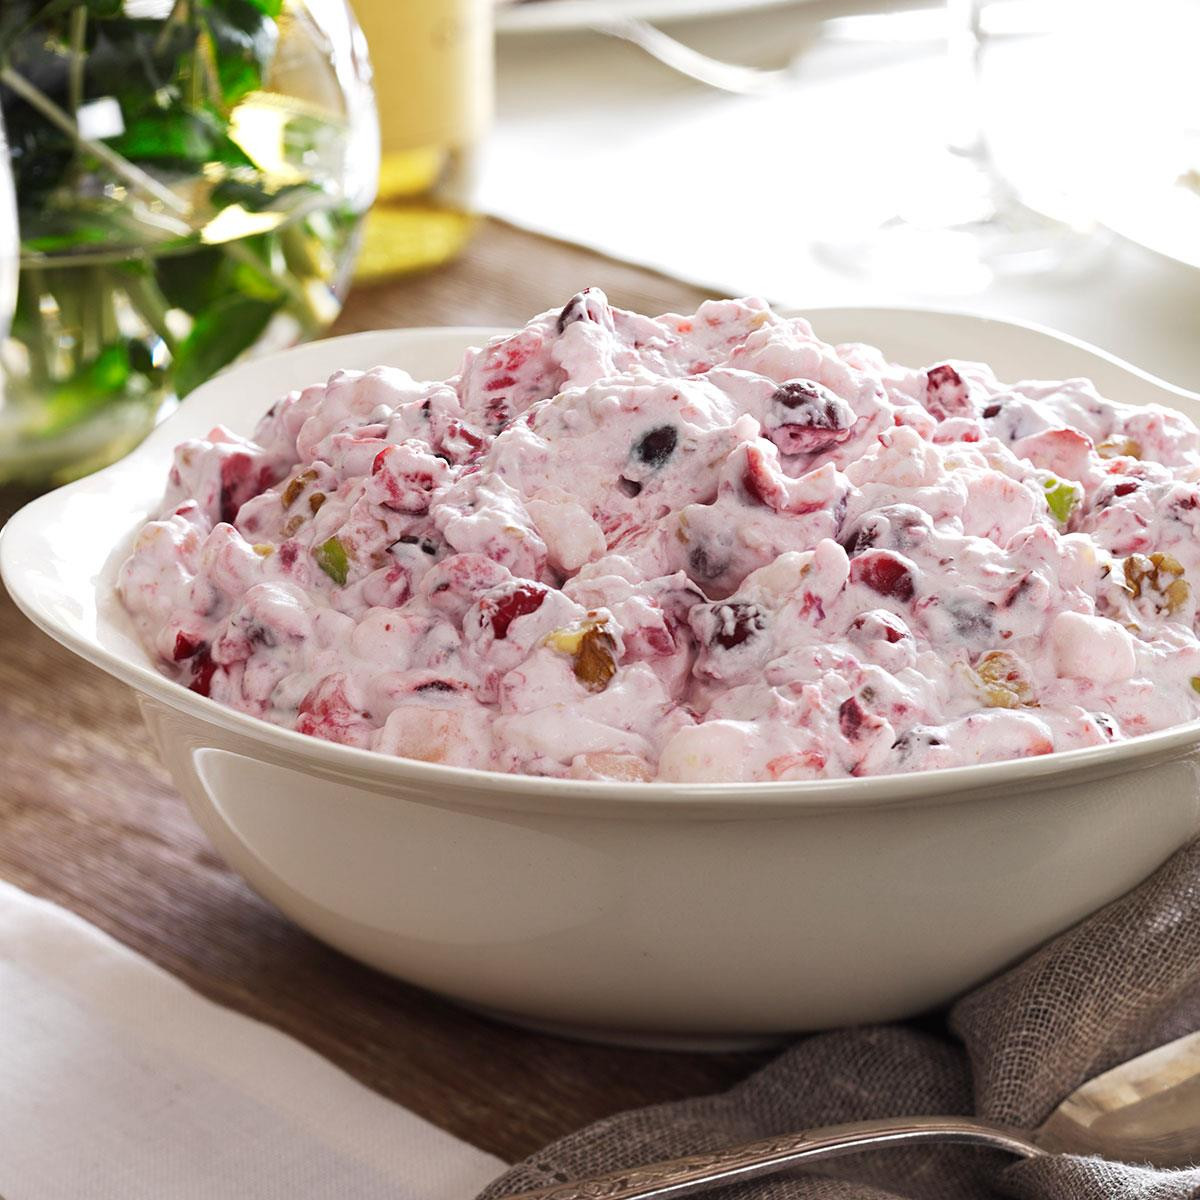 Fruit Salads For Thanksgiving Dinner
 Creamy Cranberry Salad Recipe